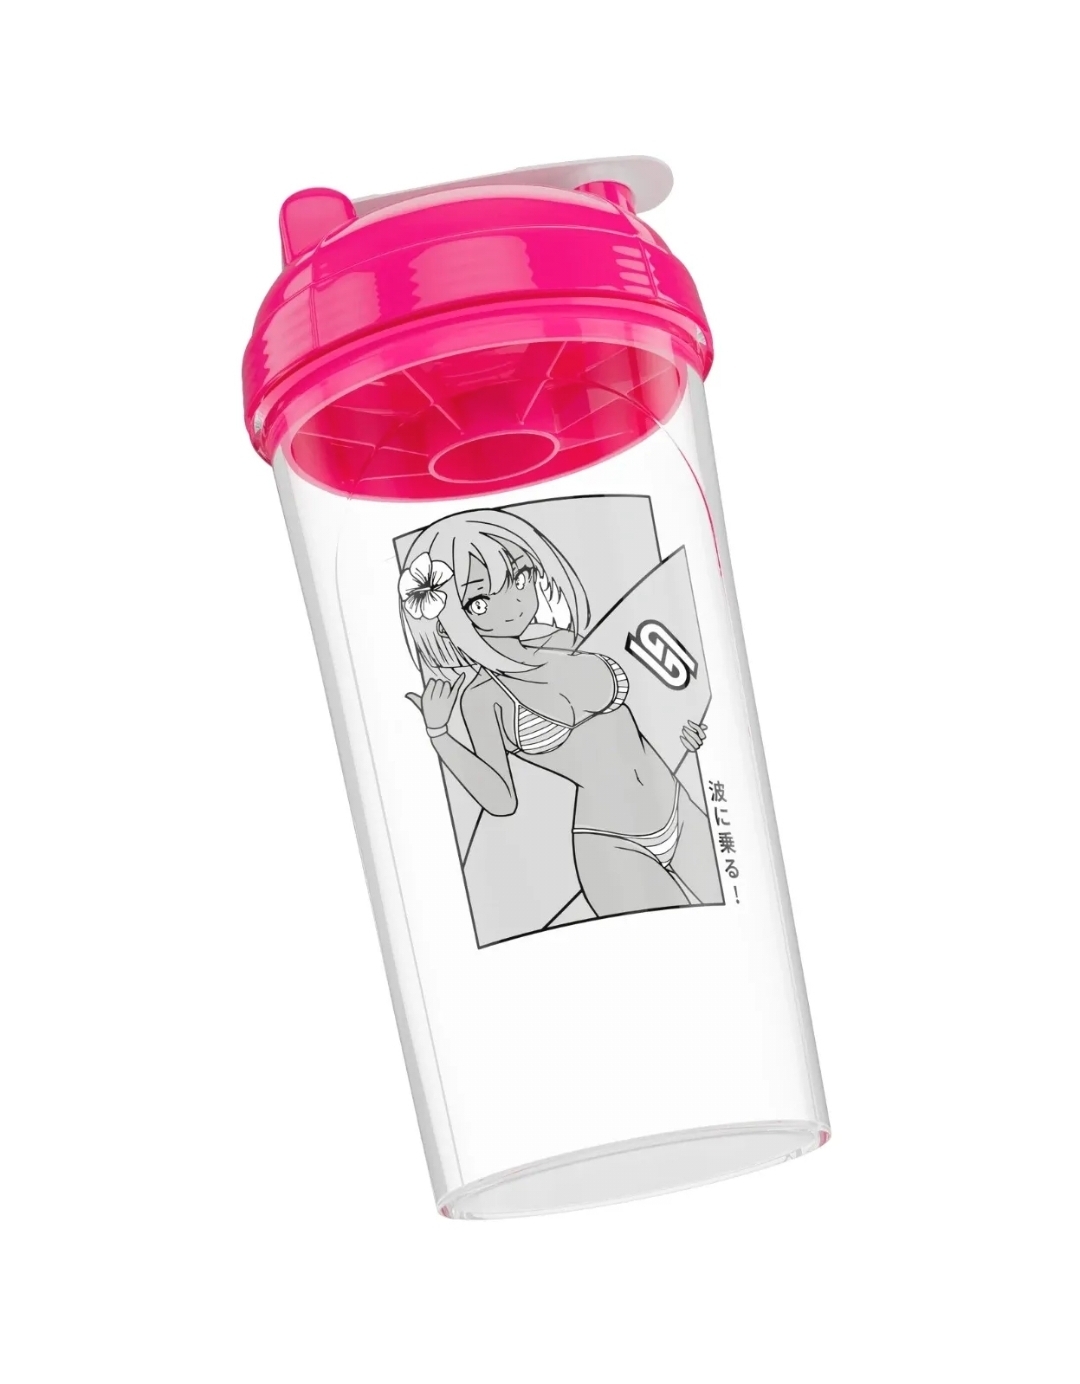 Waifu Cup S3.11: Heart Racer collectible cup-brand new in 2023